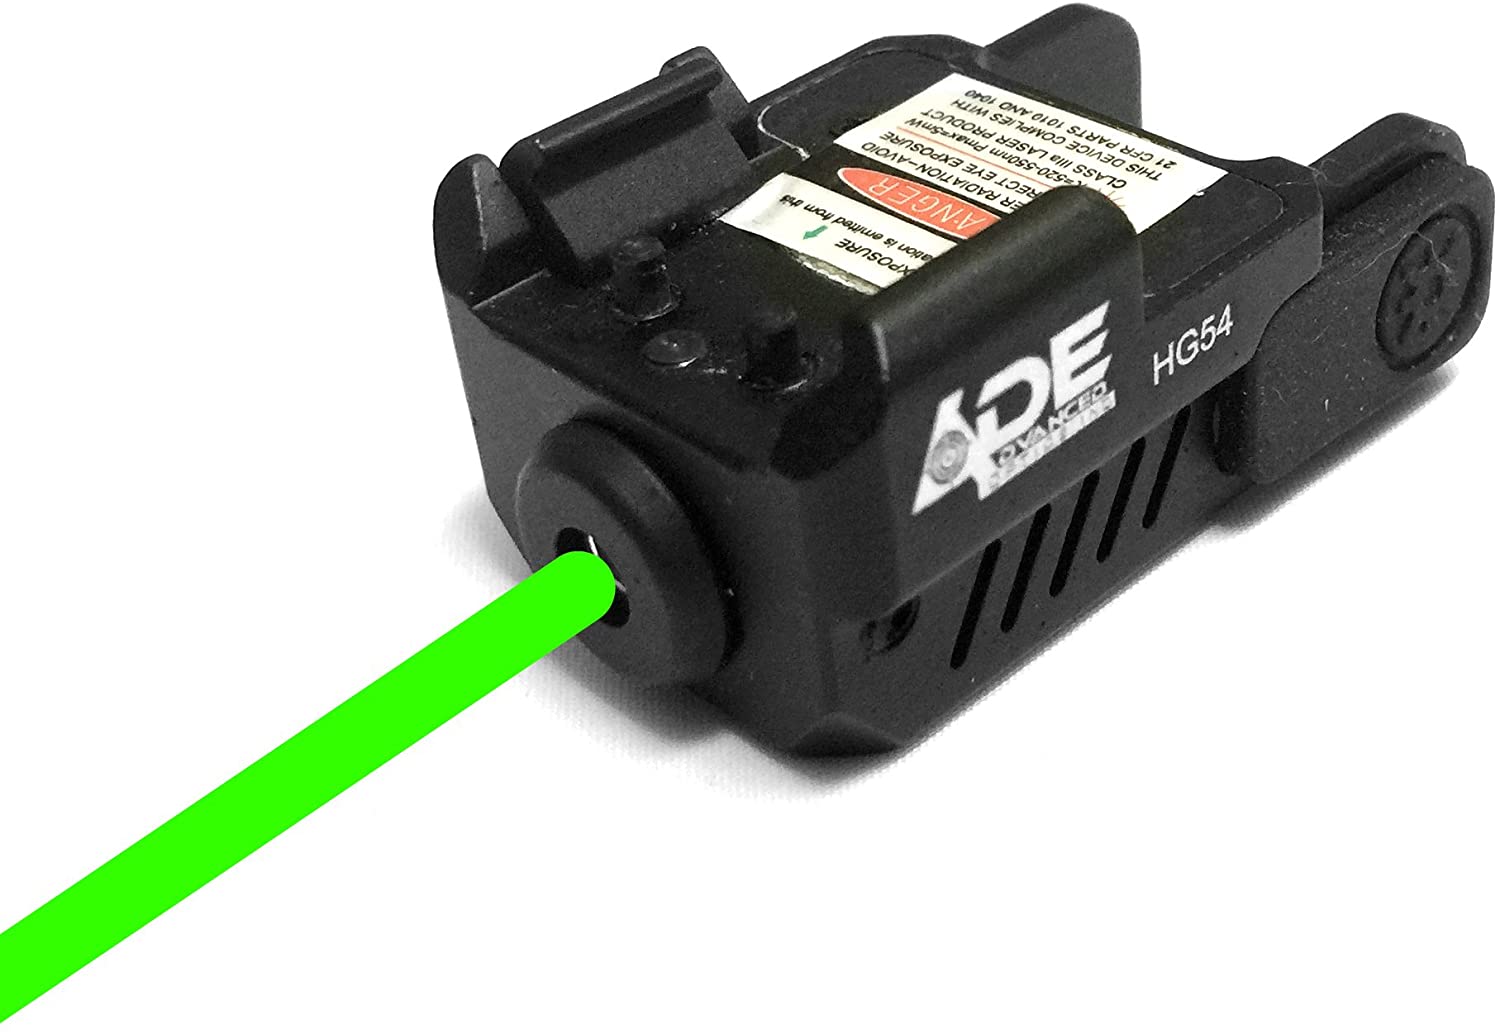 green pistol laser sight for walther p22